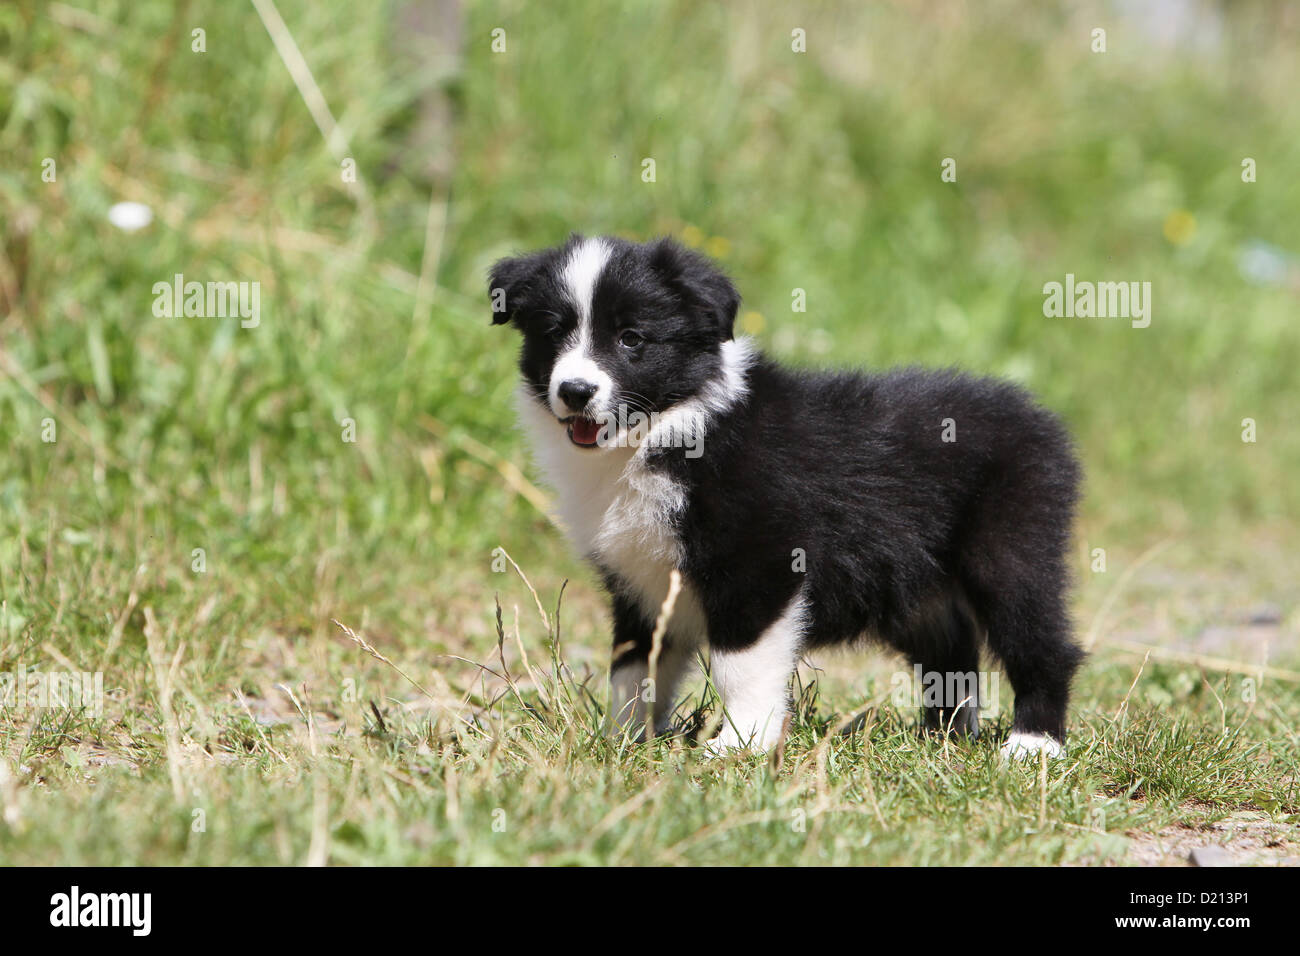 Dog Border Collie puppy black and white standing profile Stock Photo - Alamy